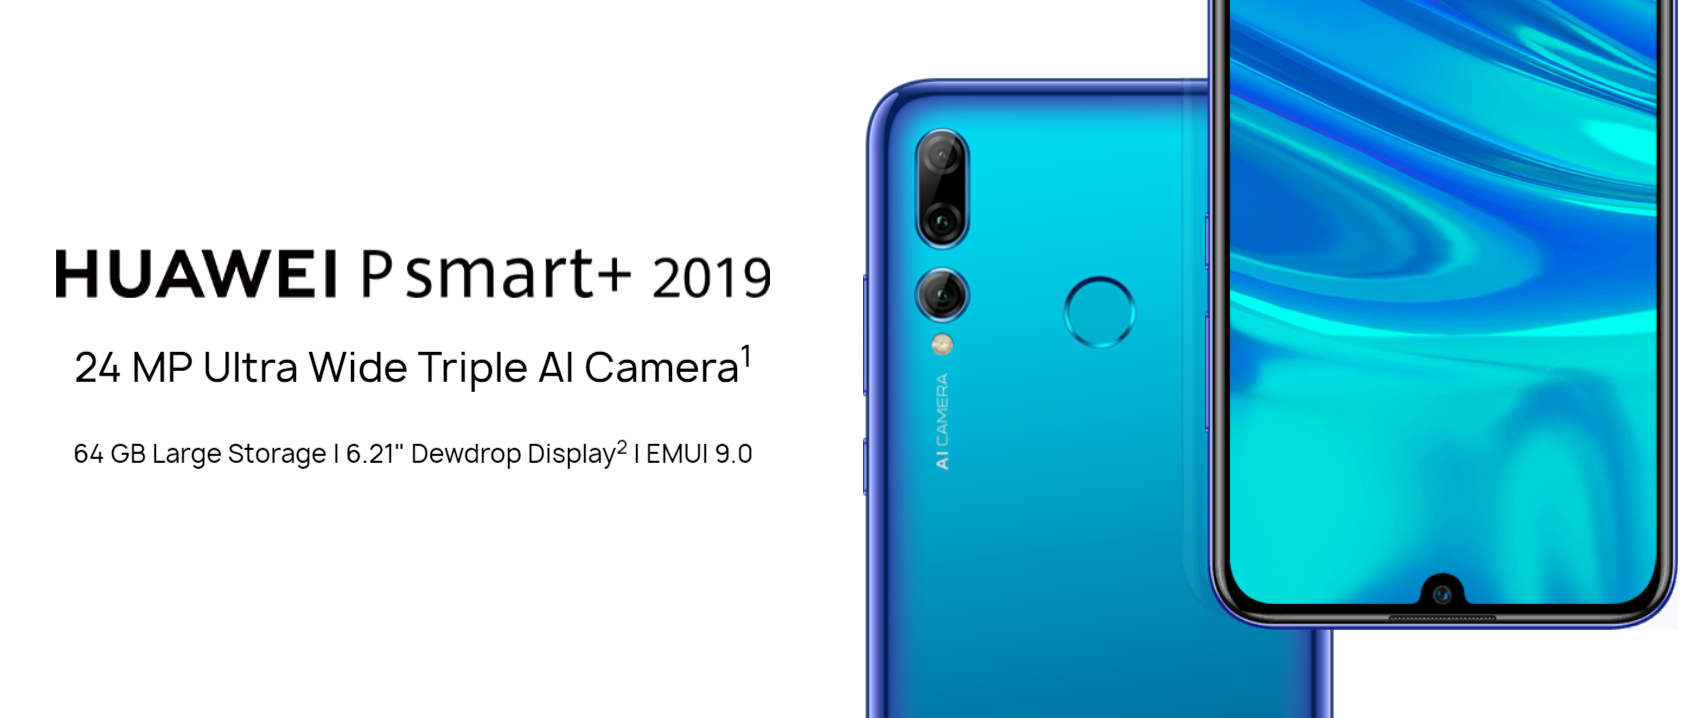 Huawei P Smart+ 2019 featured